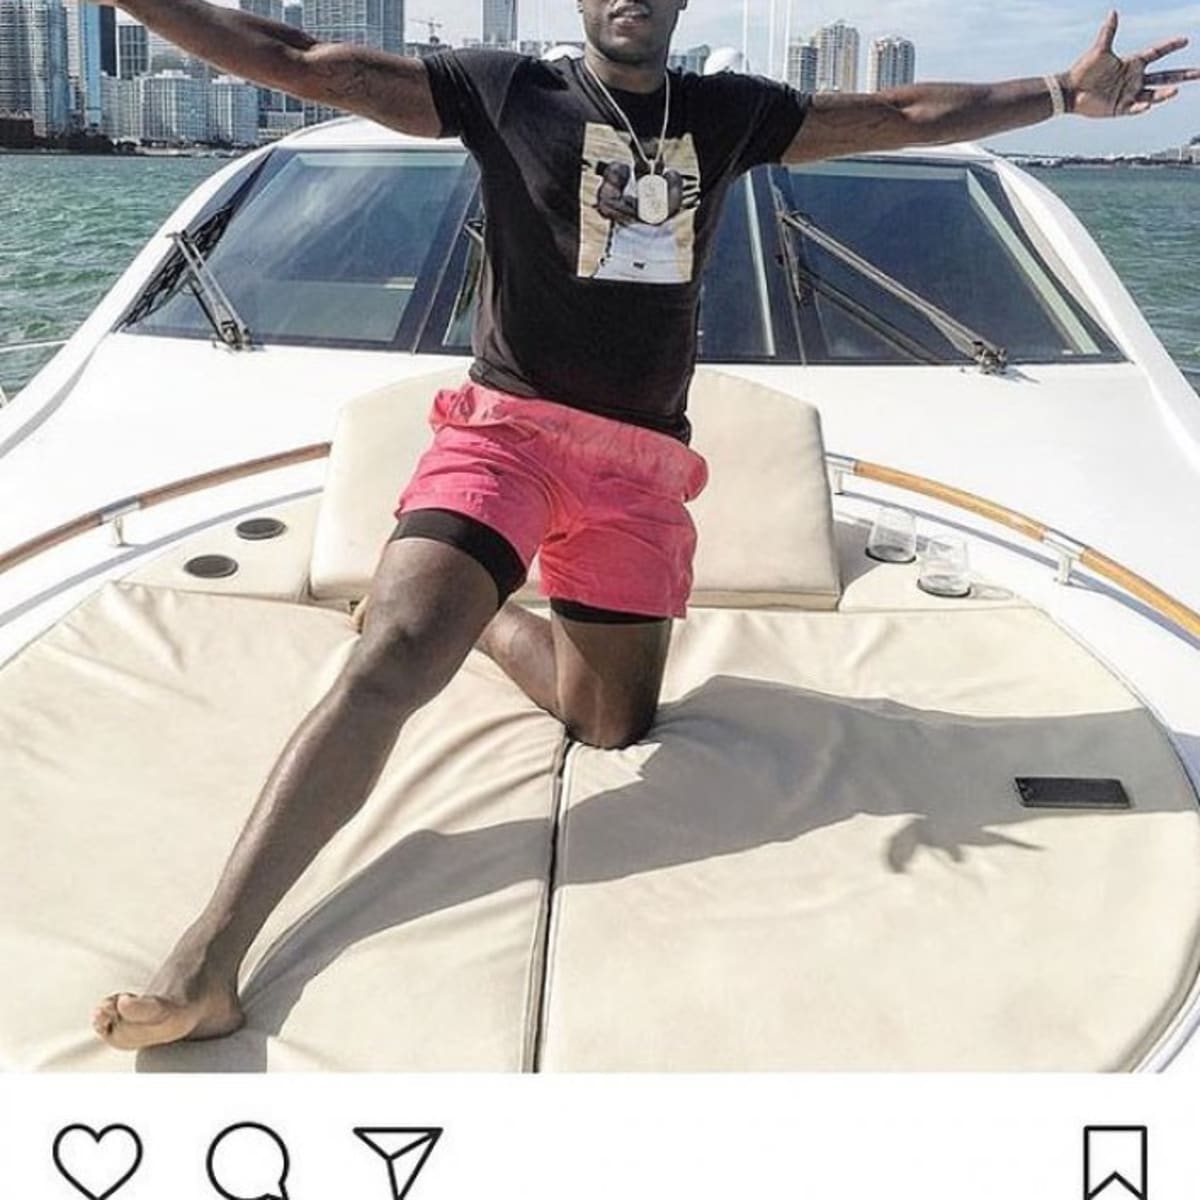 NBA player suspended for hanging out on a boat - Trade Only Today